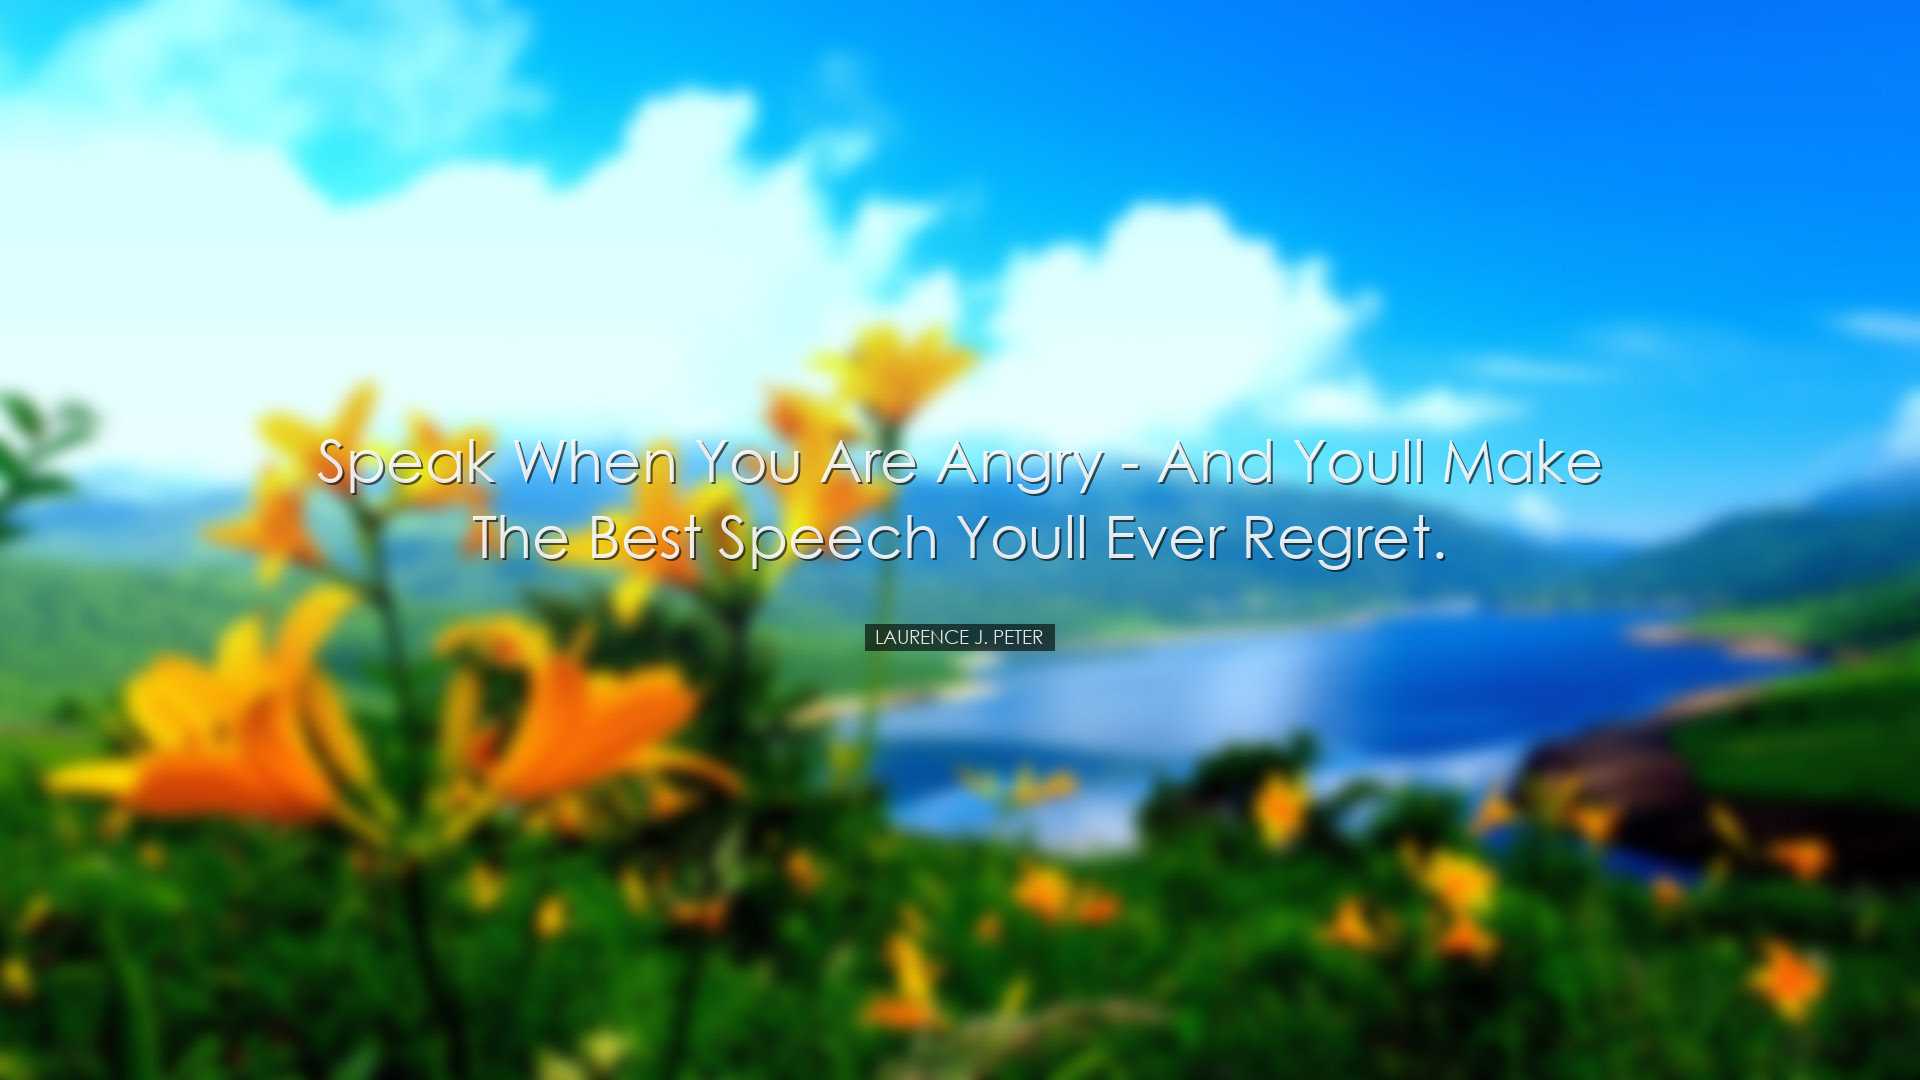 Speak when you are angry - and youll make the best speech youll ev